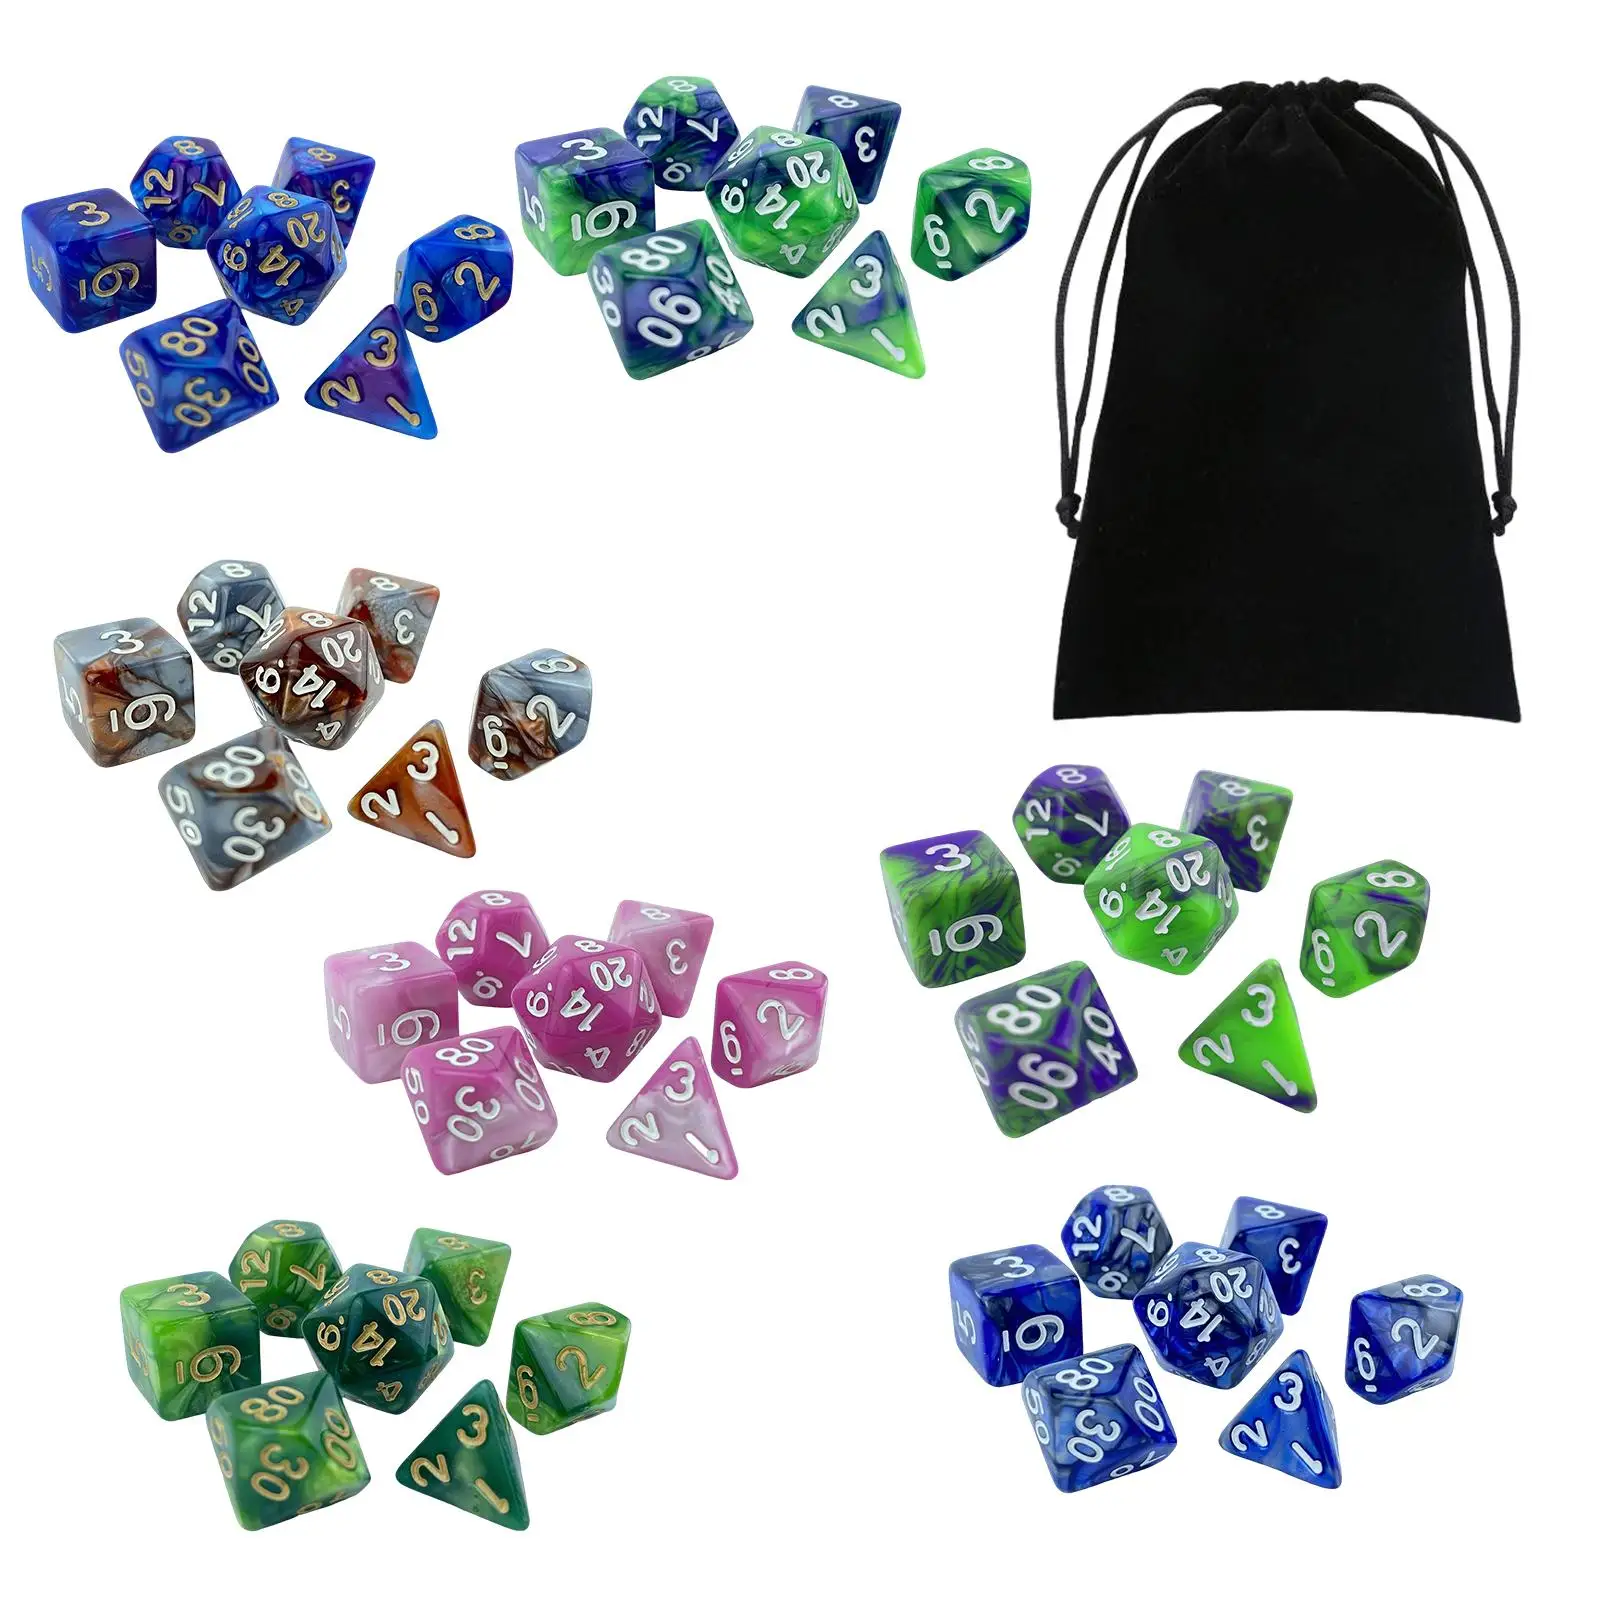 49Pcs Engraved Polyhedral Dices Set with Storage Bag Entertainment Toy Game Dices for Roll Playing Games Table Games Parties KTV